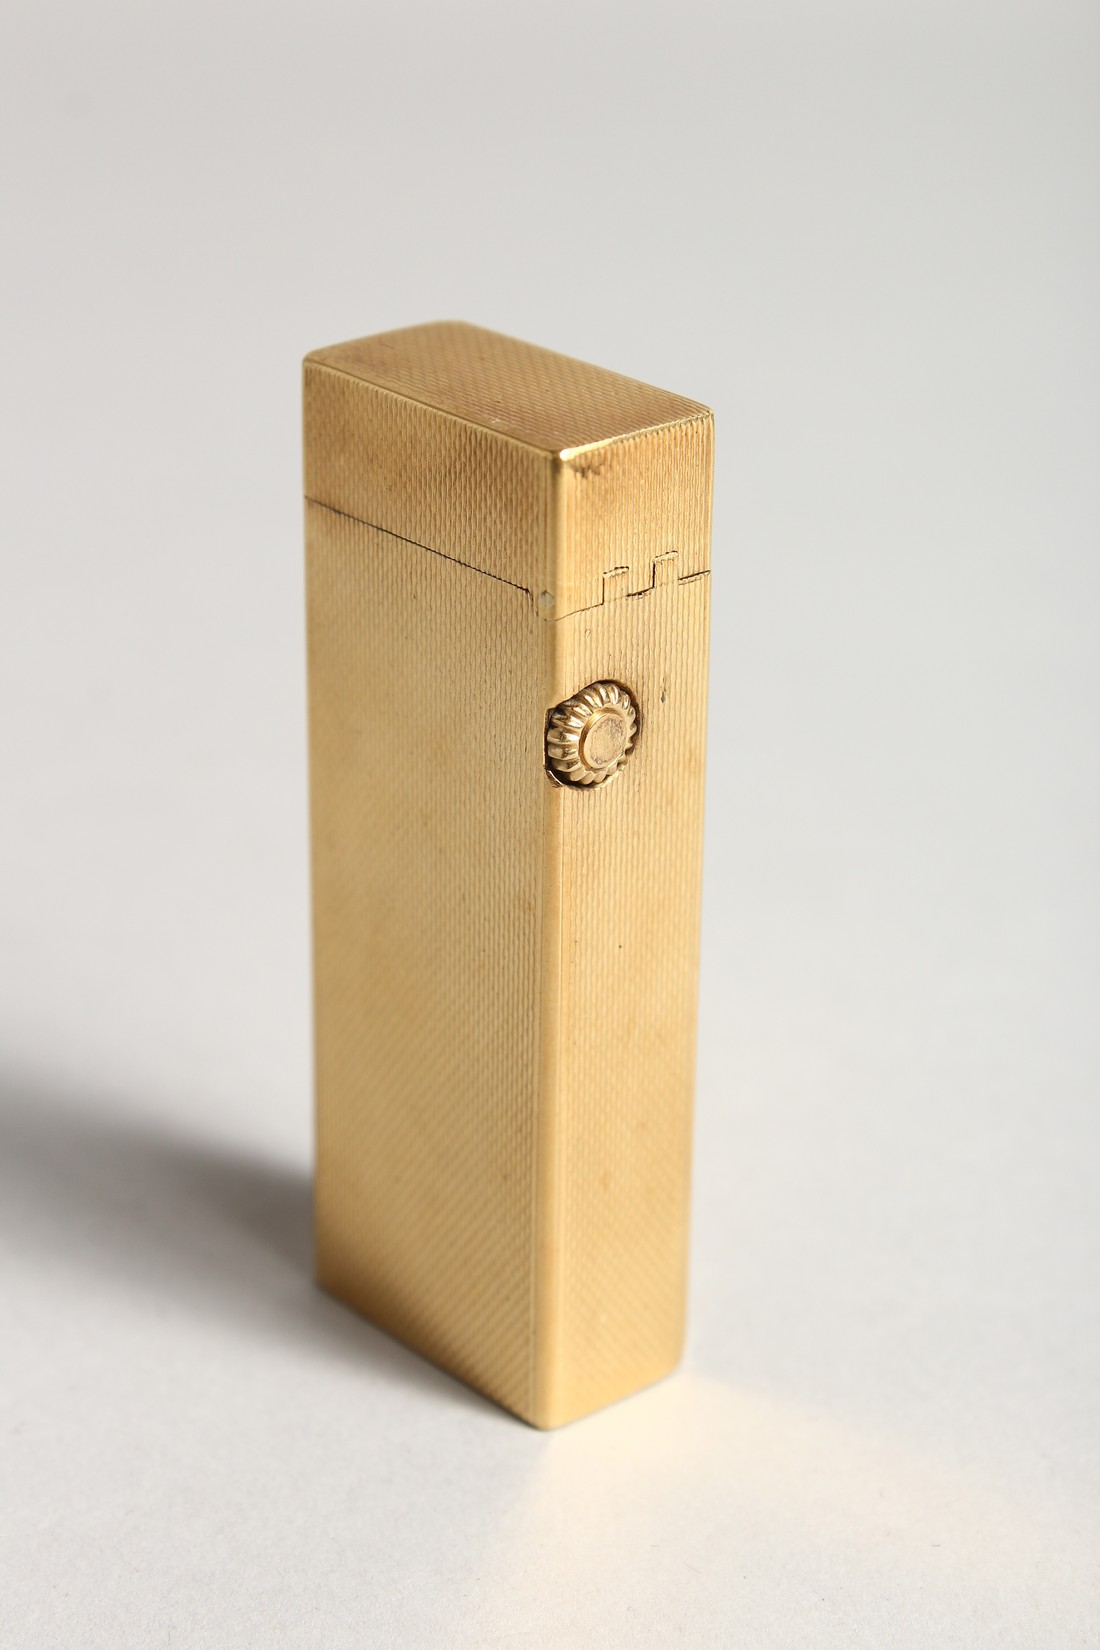 AN 18CT GOLD GAS LIGHTER - Image 2 of 6